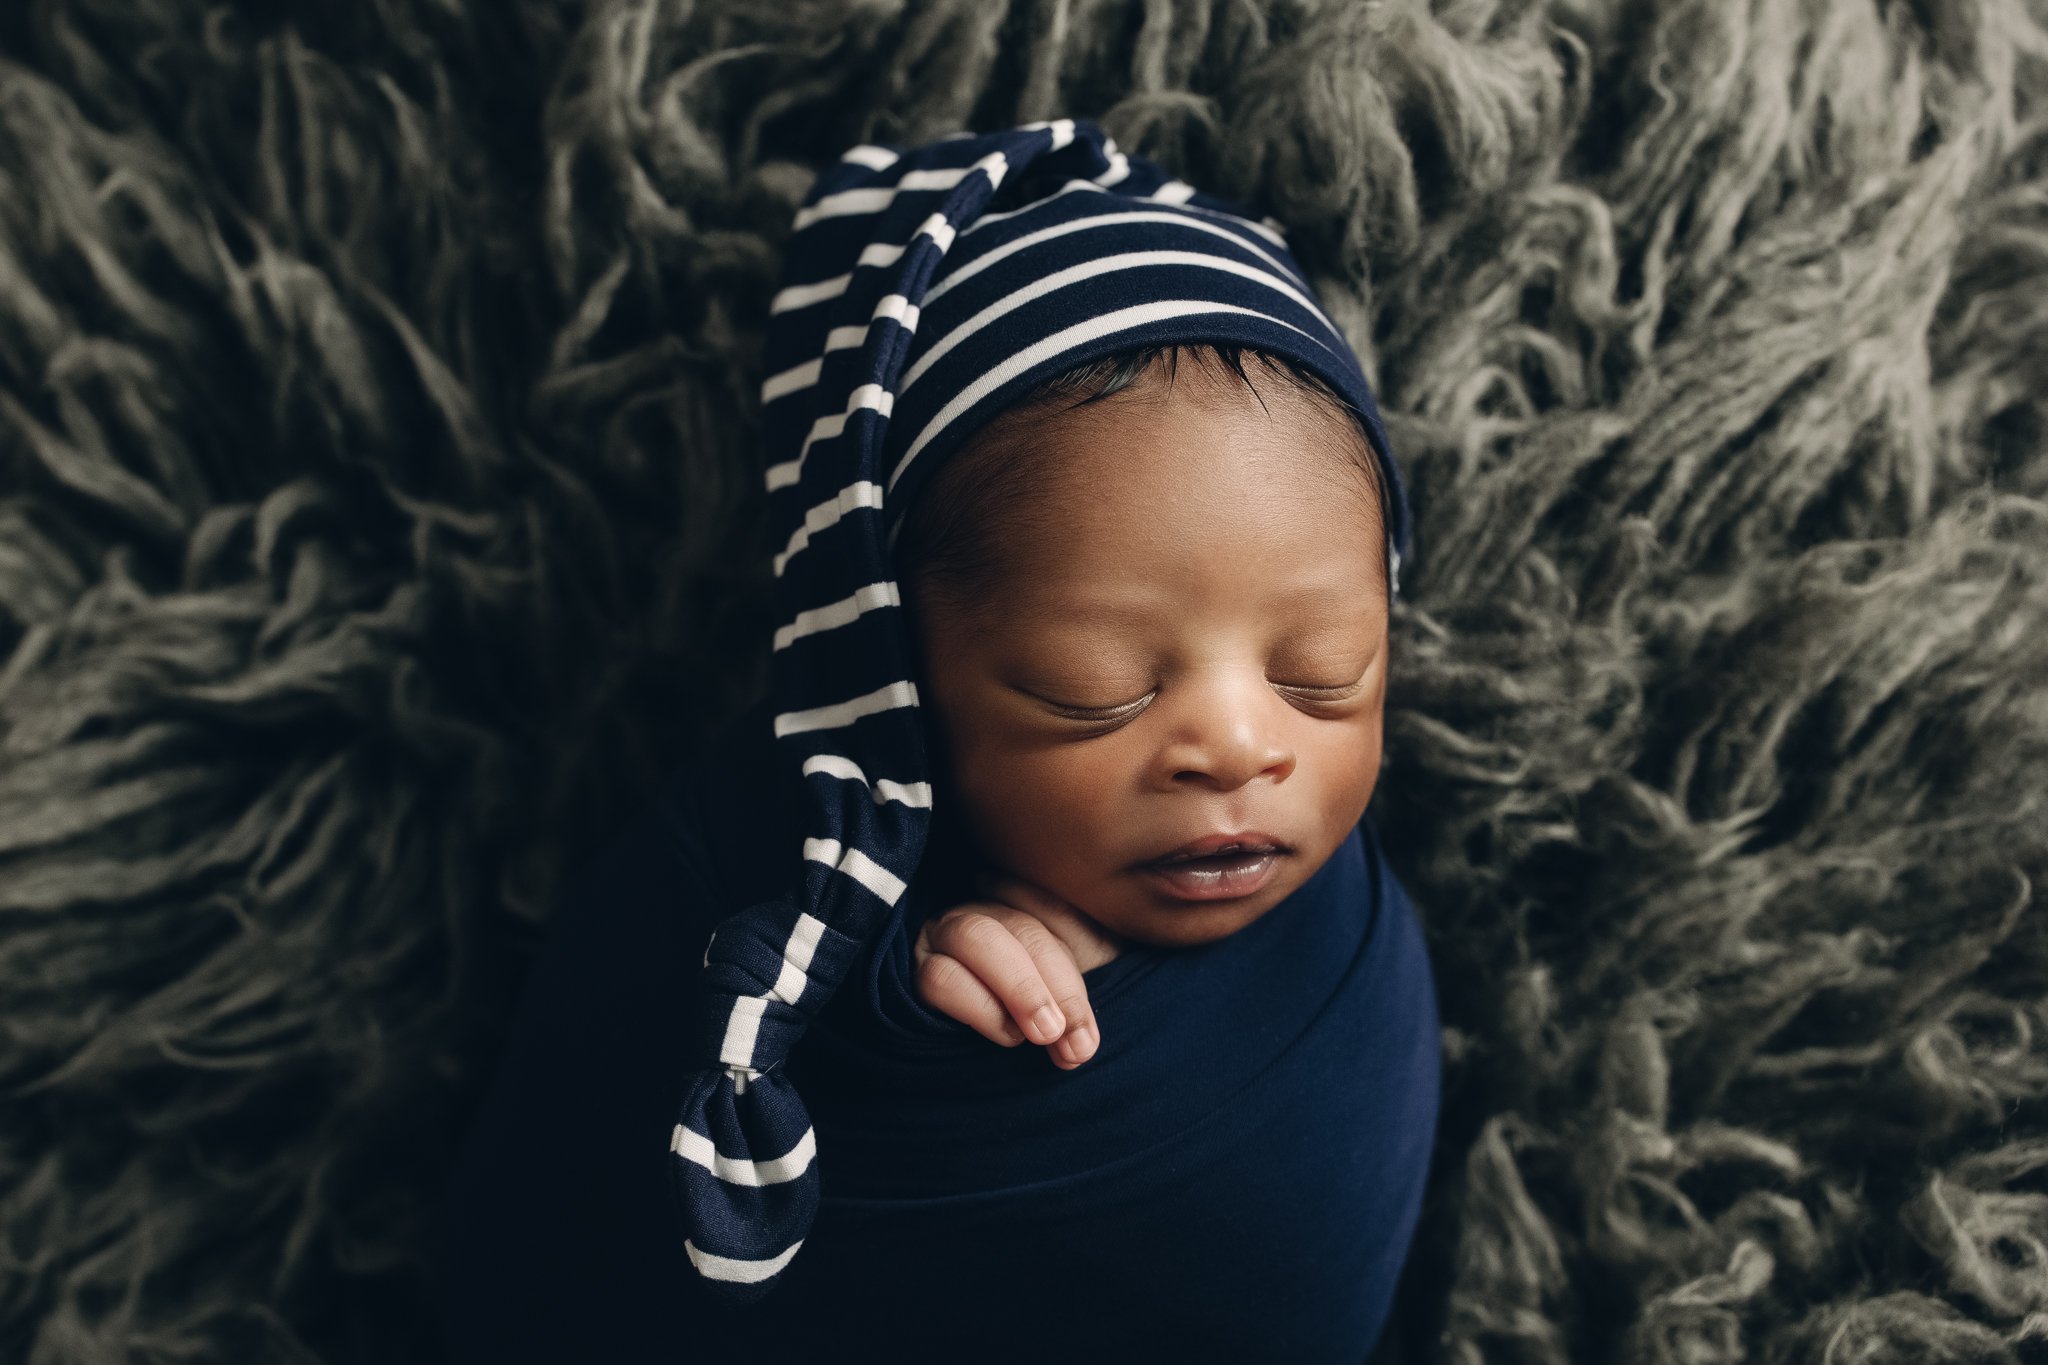 Posed_Studio_Newborn_Photographer_Second_Child_Siblings_Baby_Boy_Navy_Mustard_by_Christie_Leigh_Photo_Champion_OH_Ohio_Trumbull_County-5.jpg